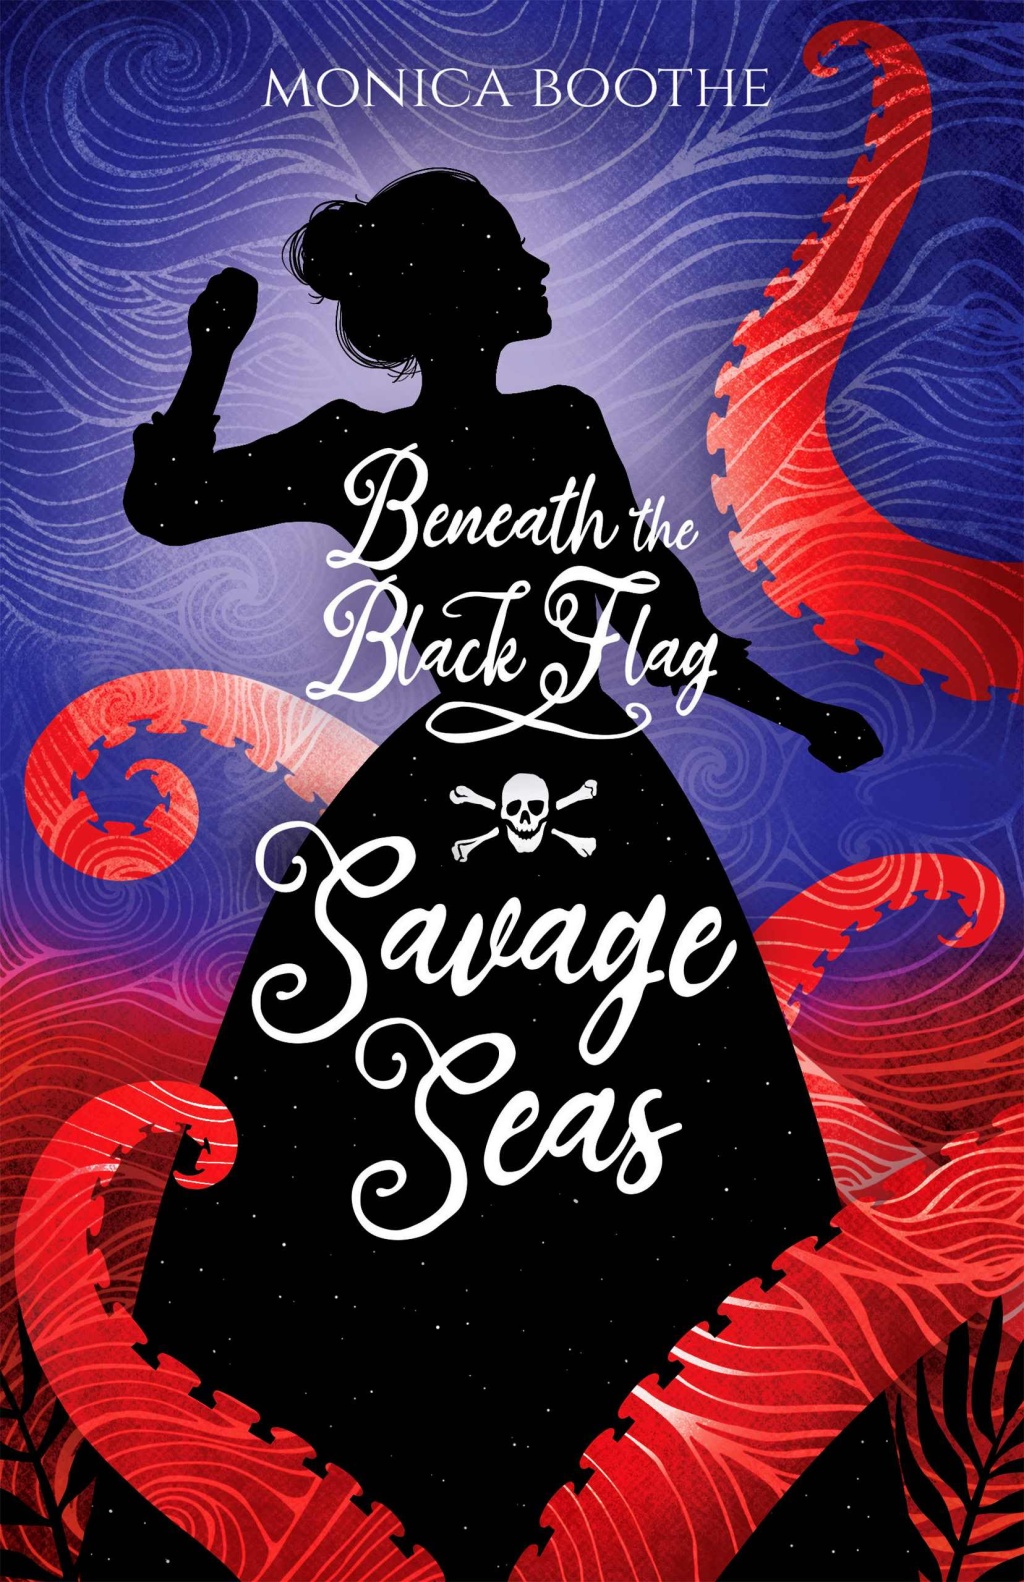 Savage Seas by Monica Boothe